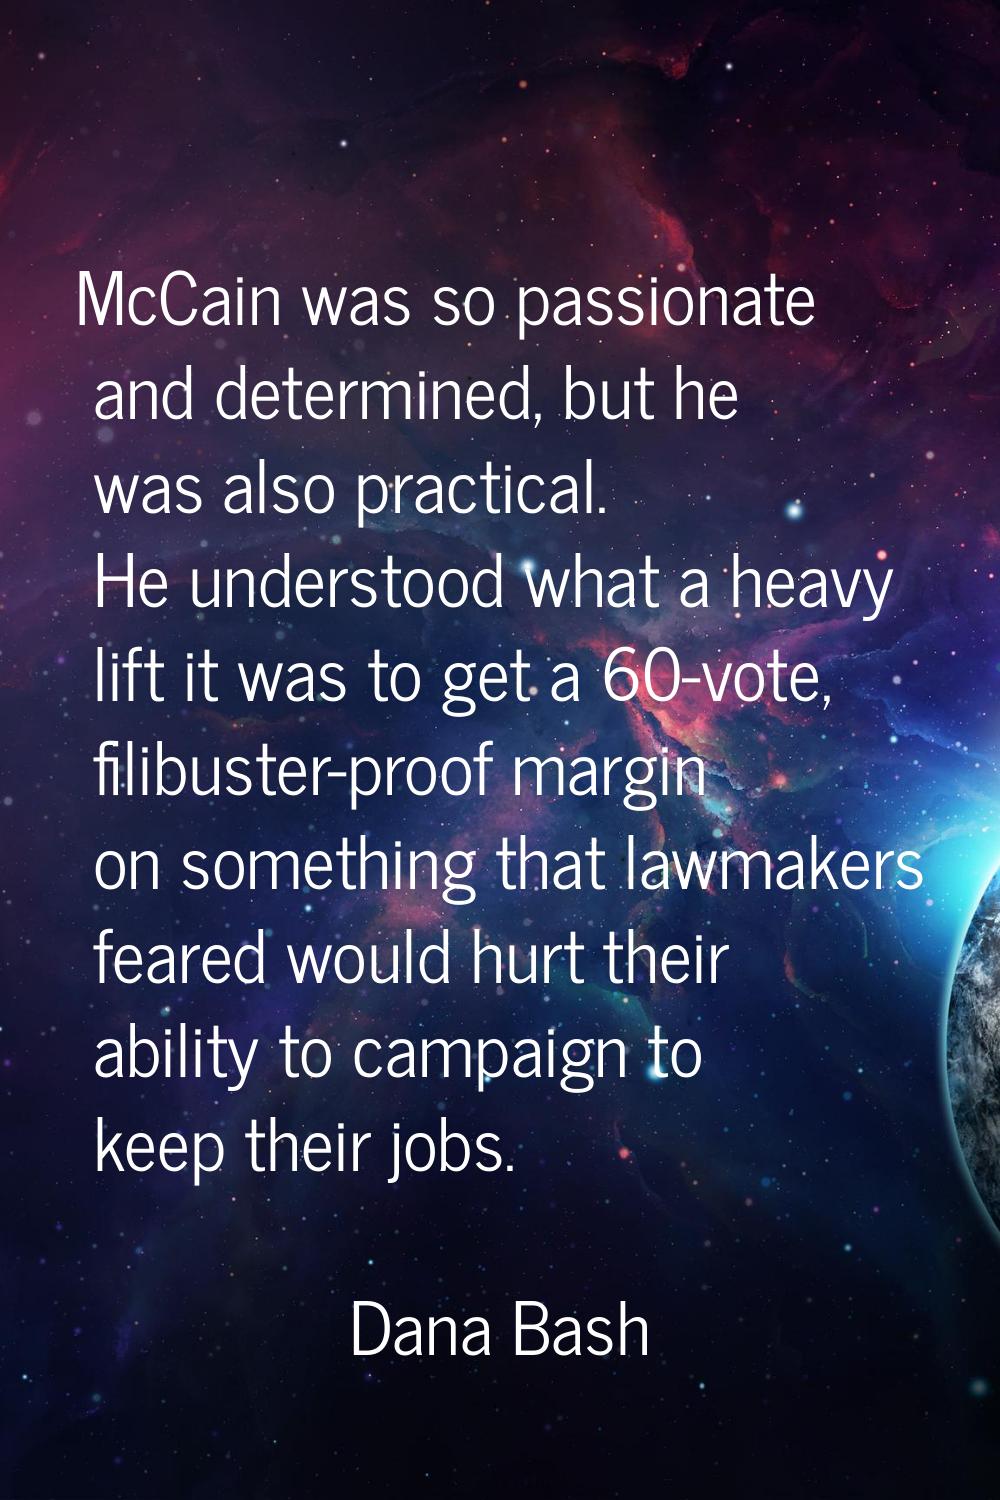 McCain was so passionate and determined, but he was also practical. He understood what a heavy lift